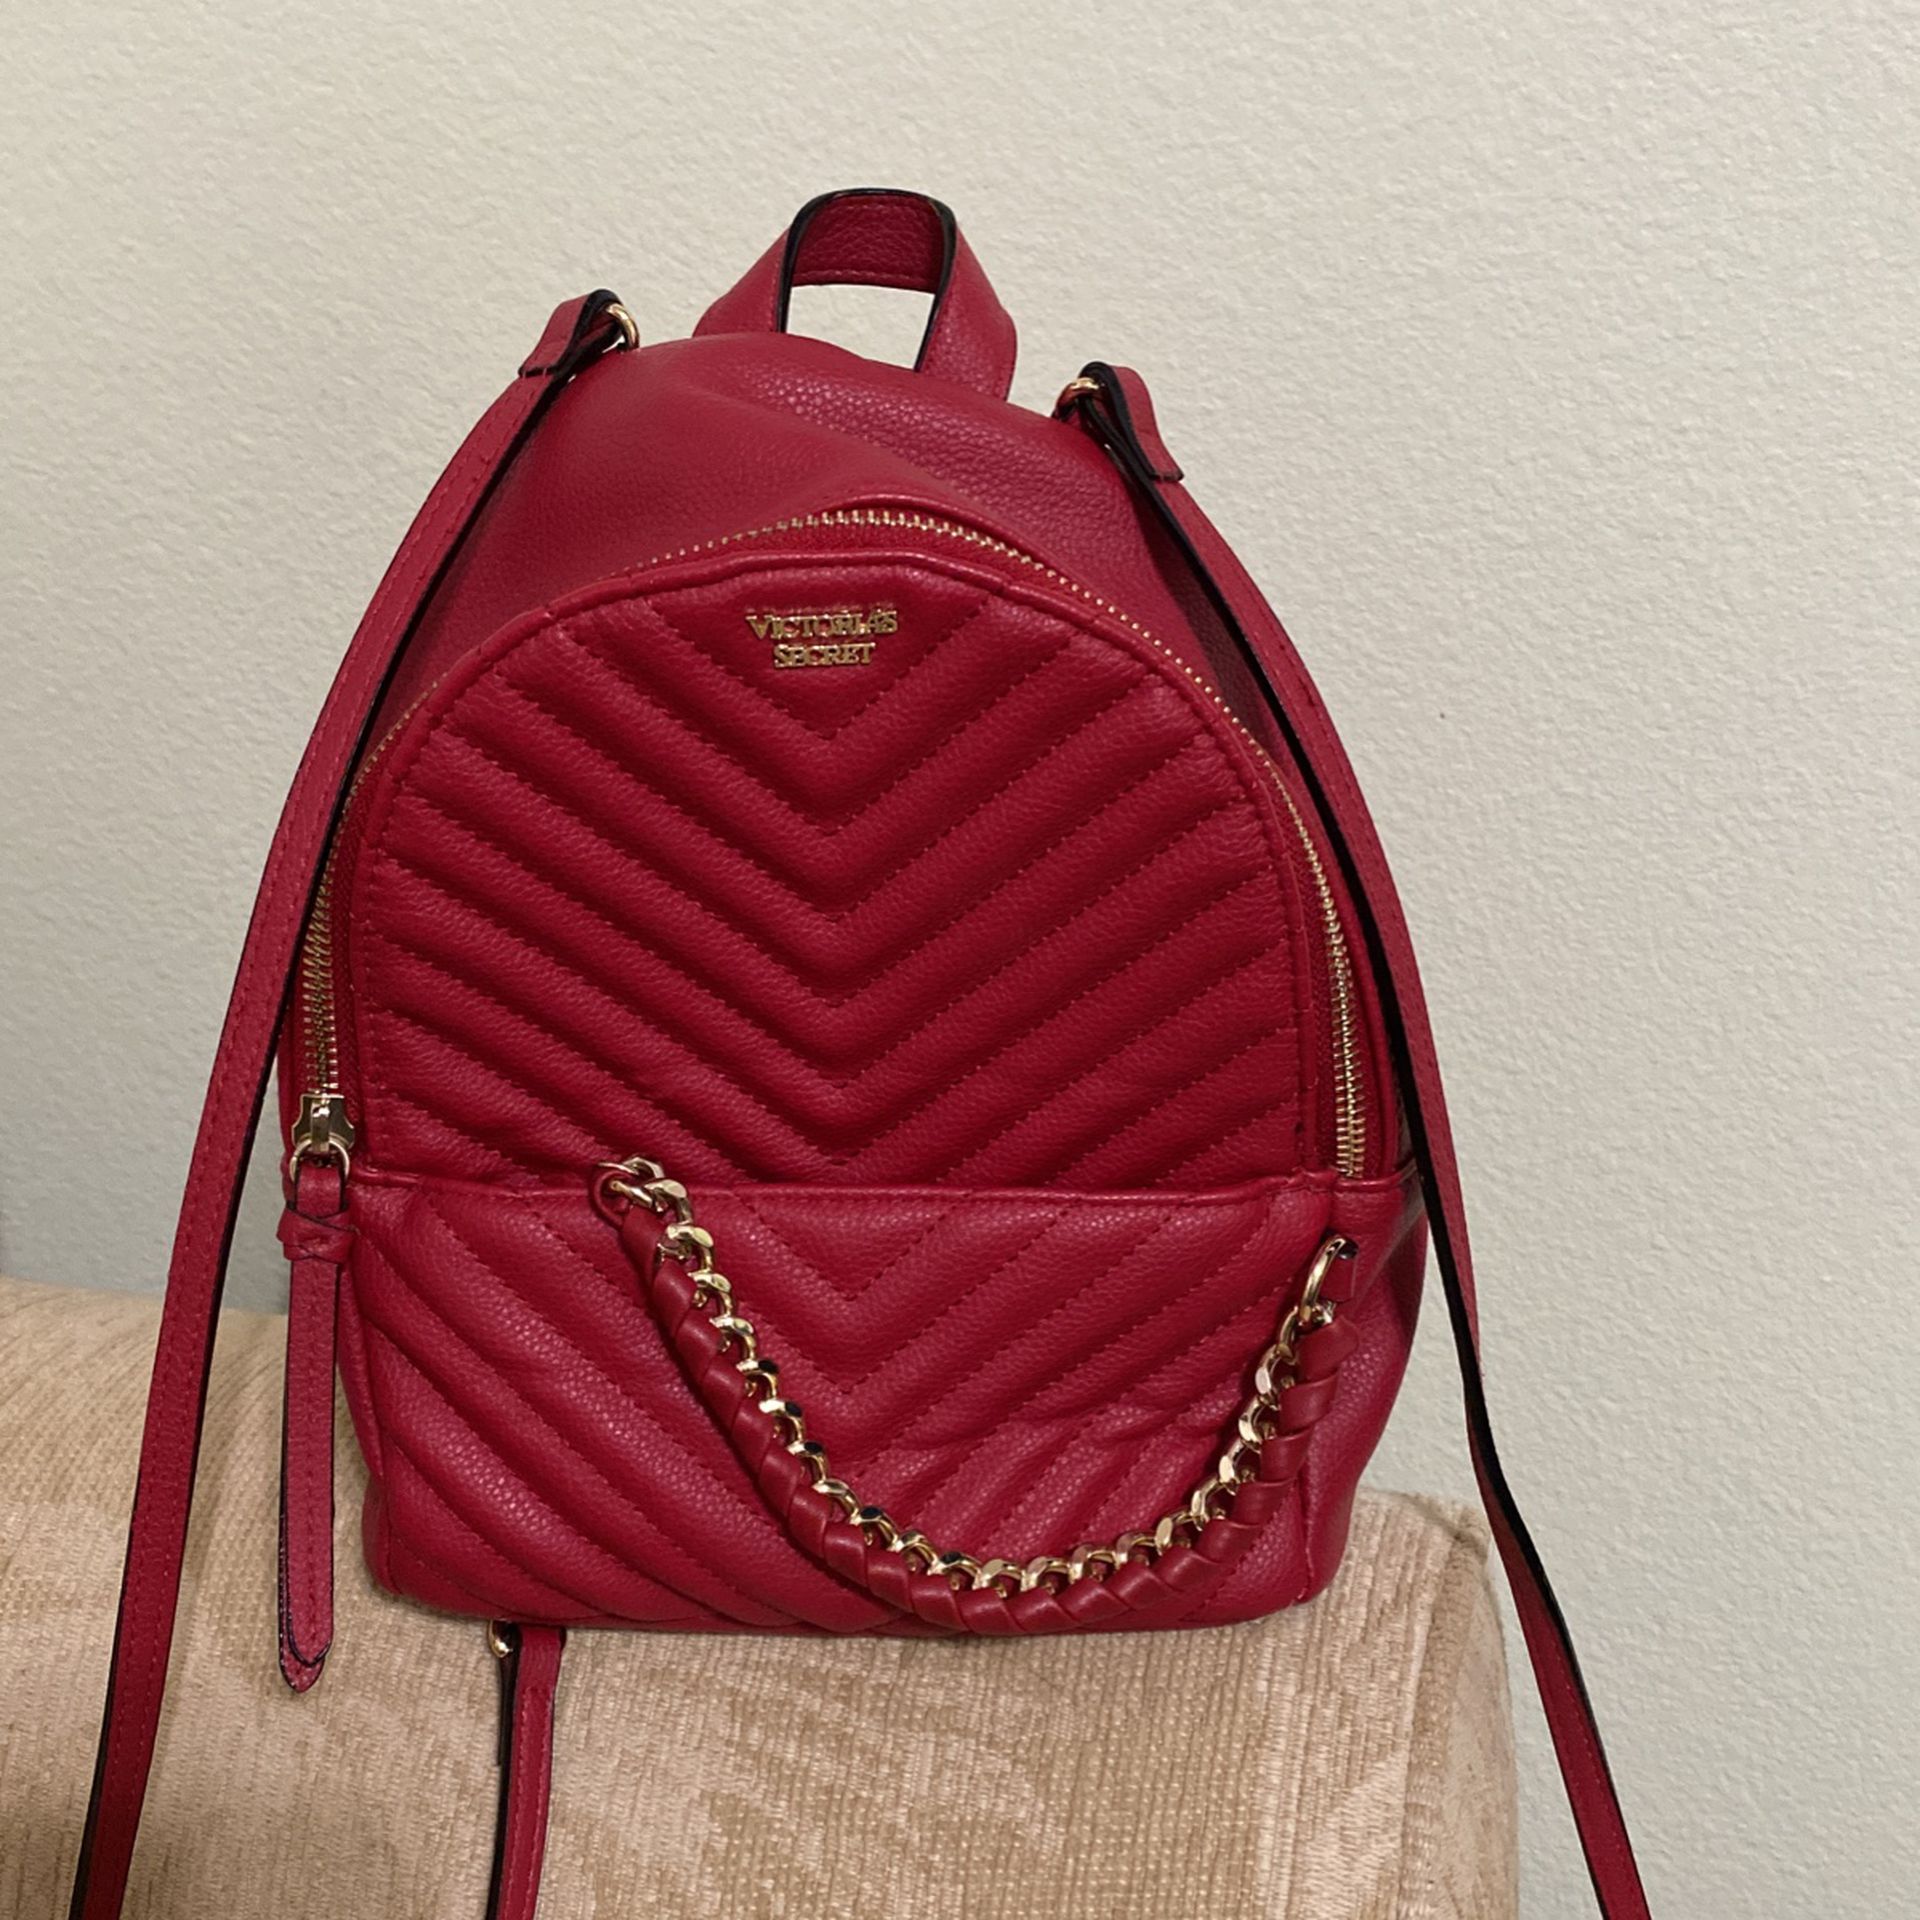 Victoria's Secret Red Mini Backpack/Purse. for Sale in Bellview, FL